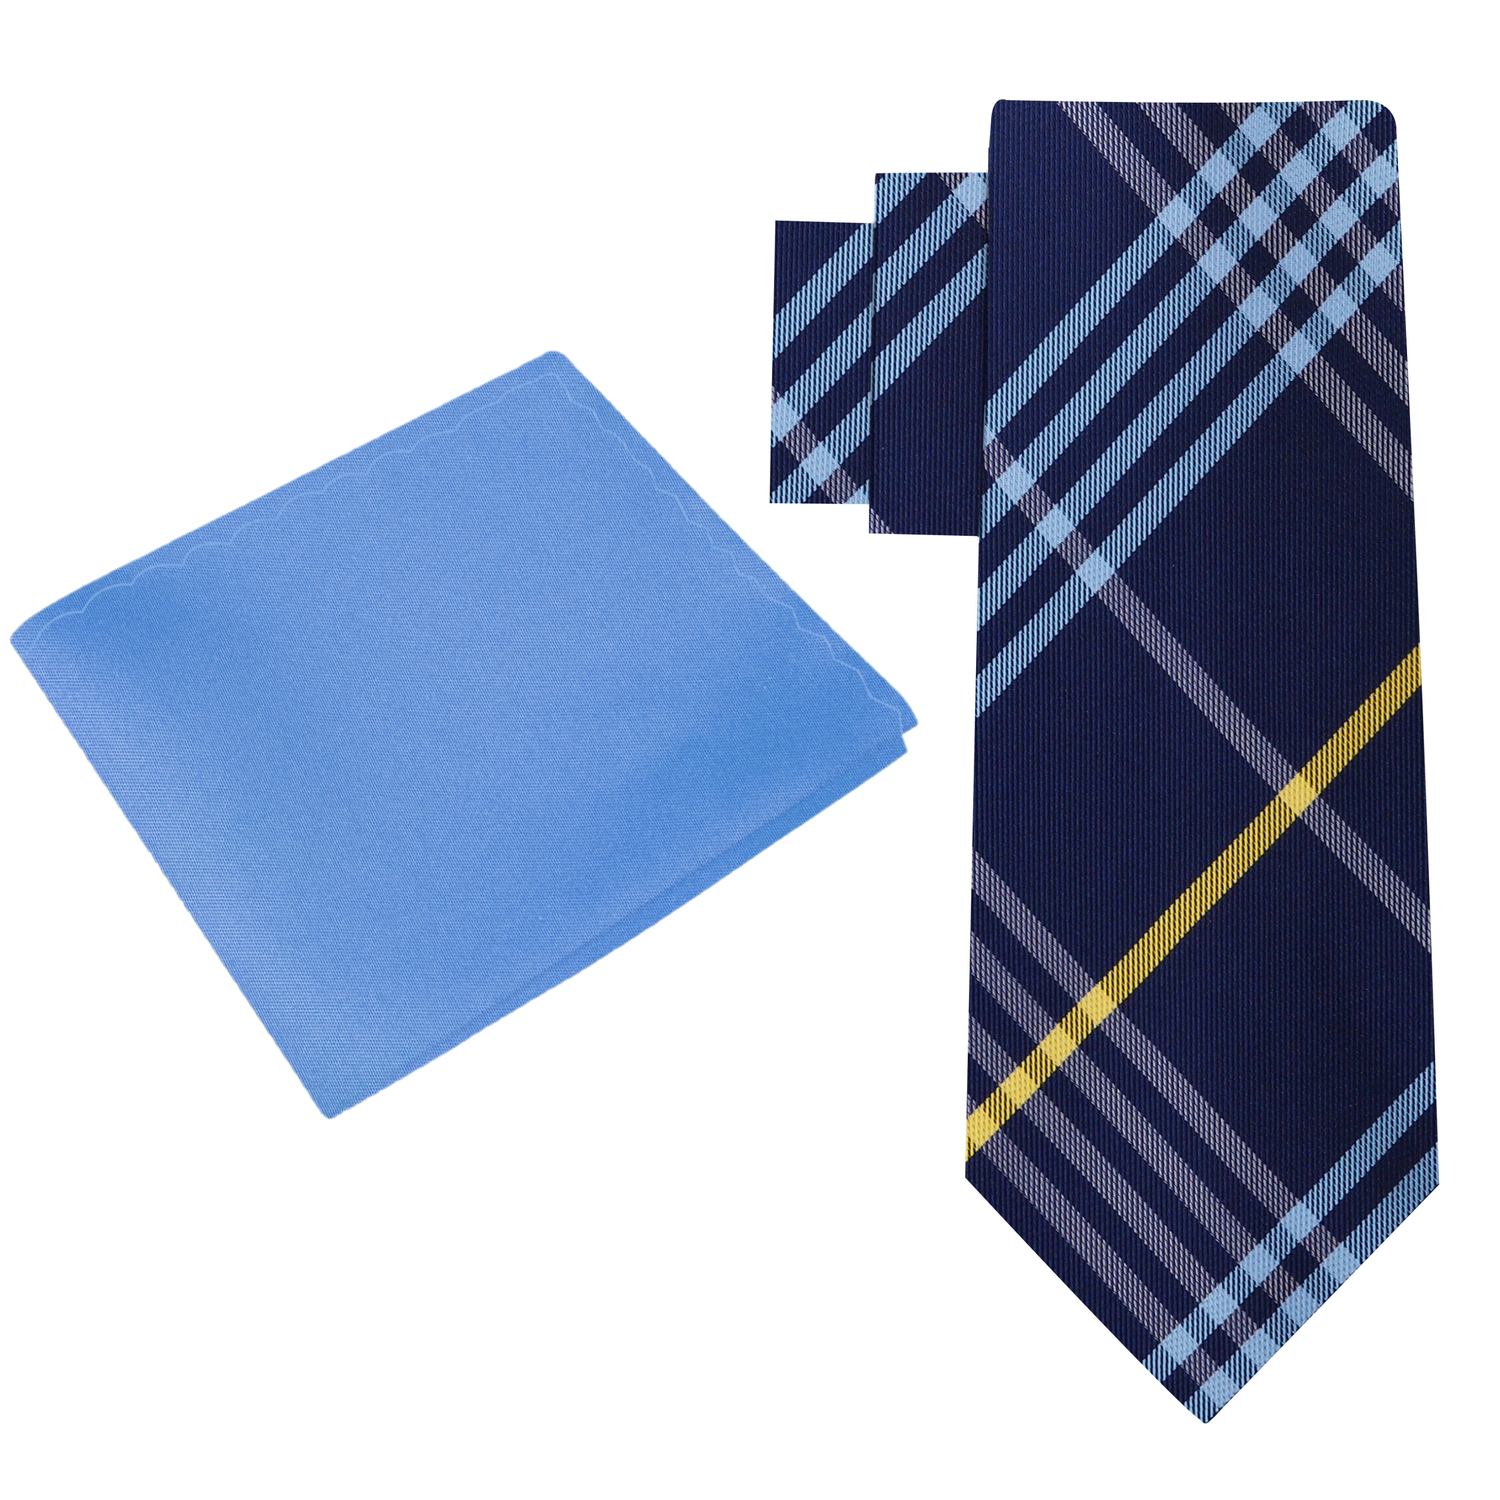 Alt view: Blue and Yellow Plaid Necktie with Light Blue Square